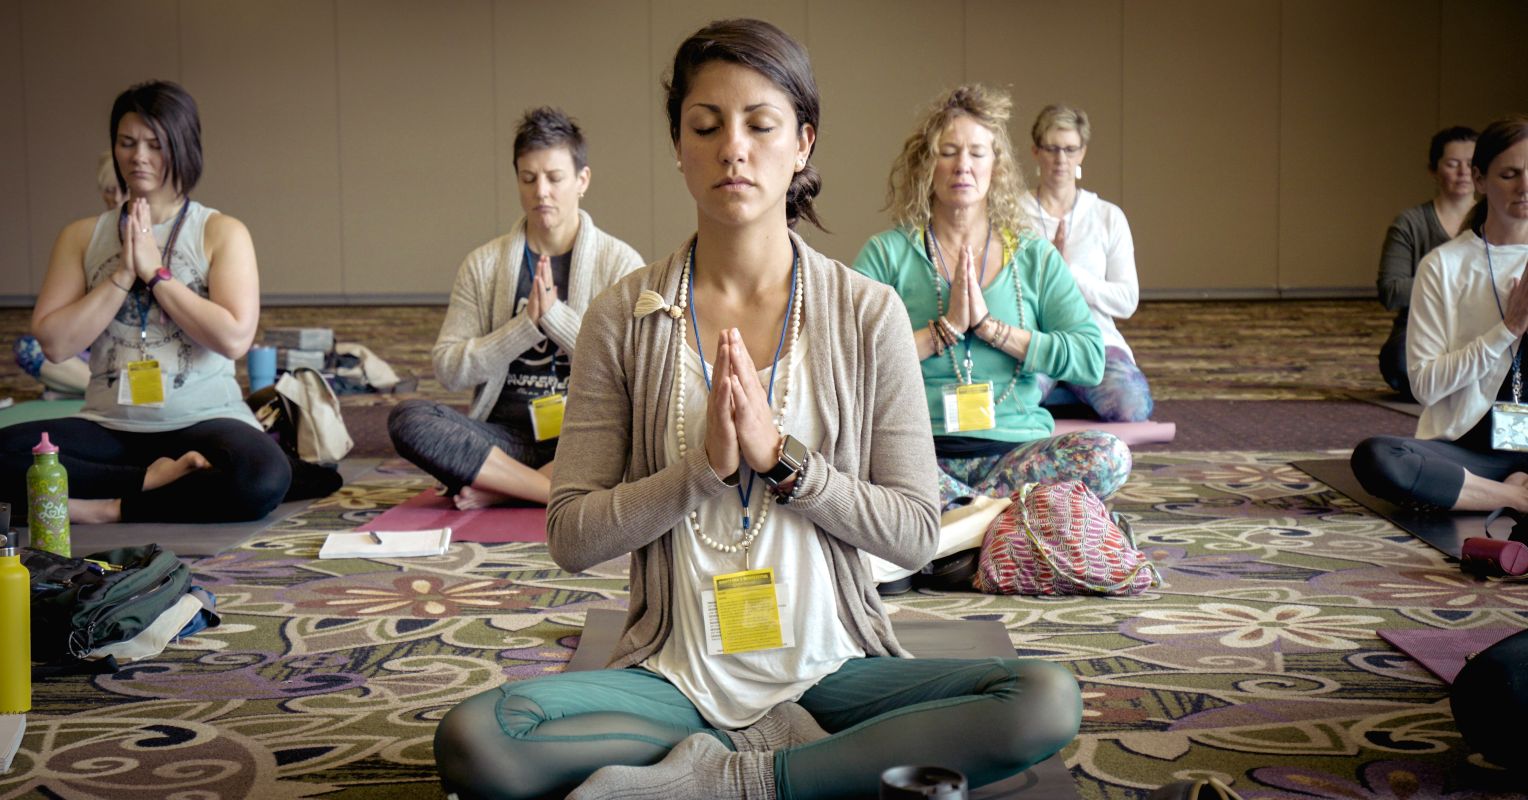 How Contemplative Practices Promote Health and Well-Being | Psychology ...